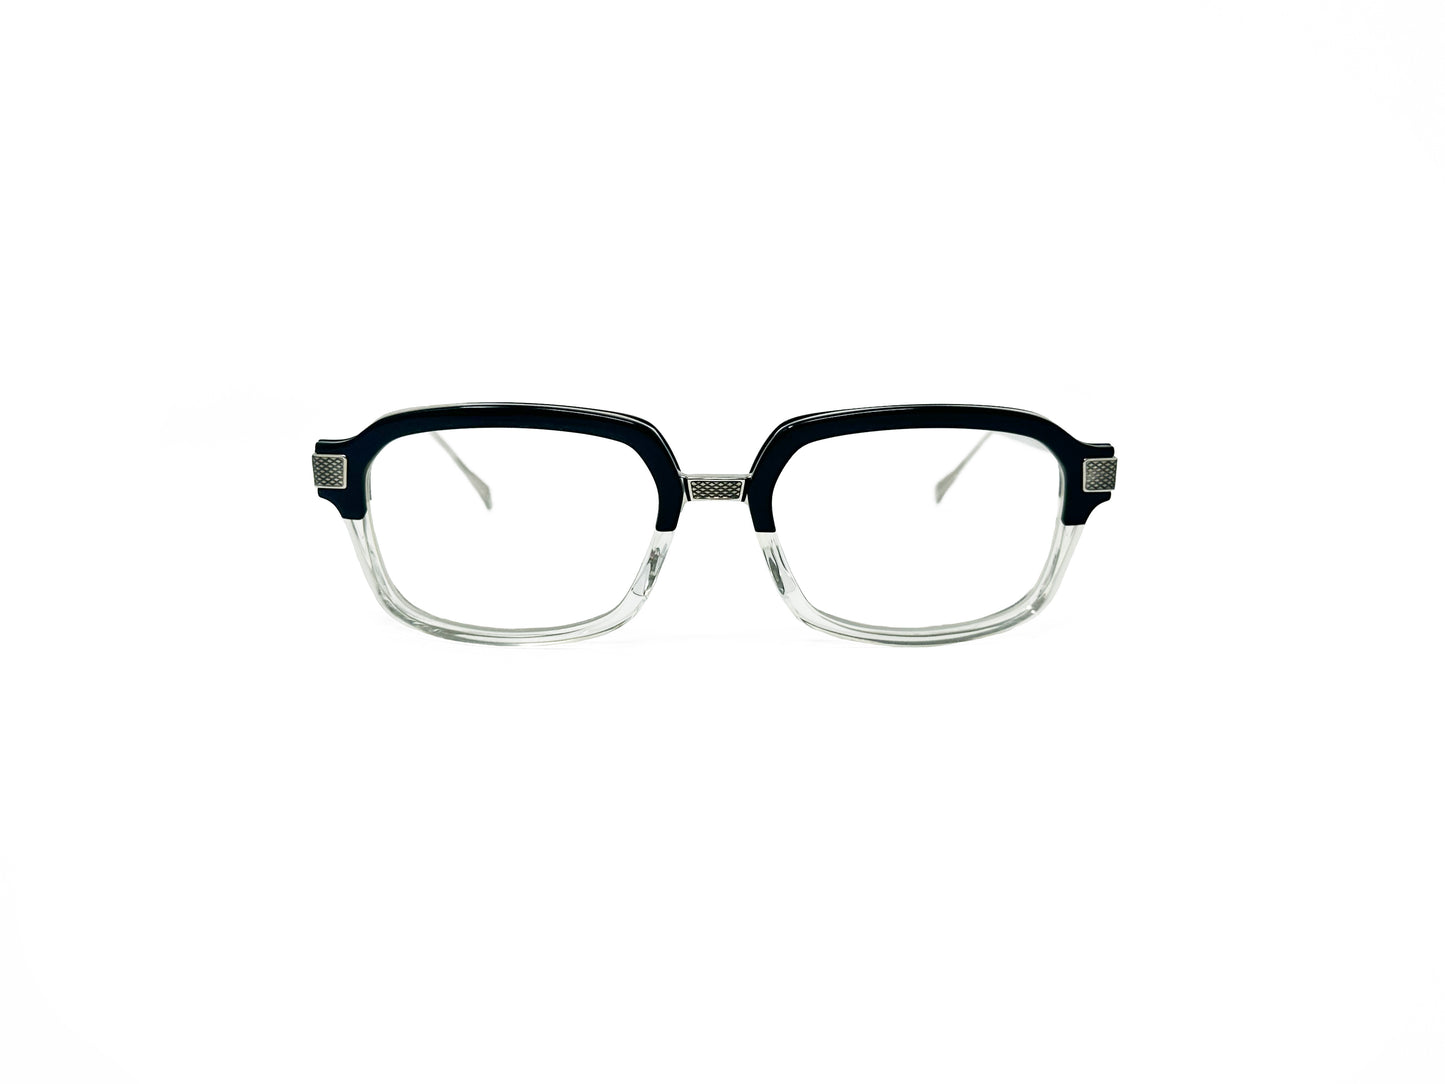 Dita square optical frame, acetate front with wire temples. Front of the frame is black on top and transparent on bottom. Model: Lexington. Color: C - Black and clear. Front view. 